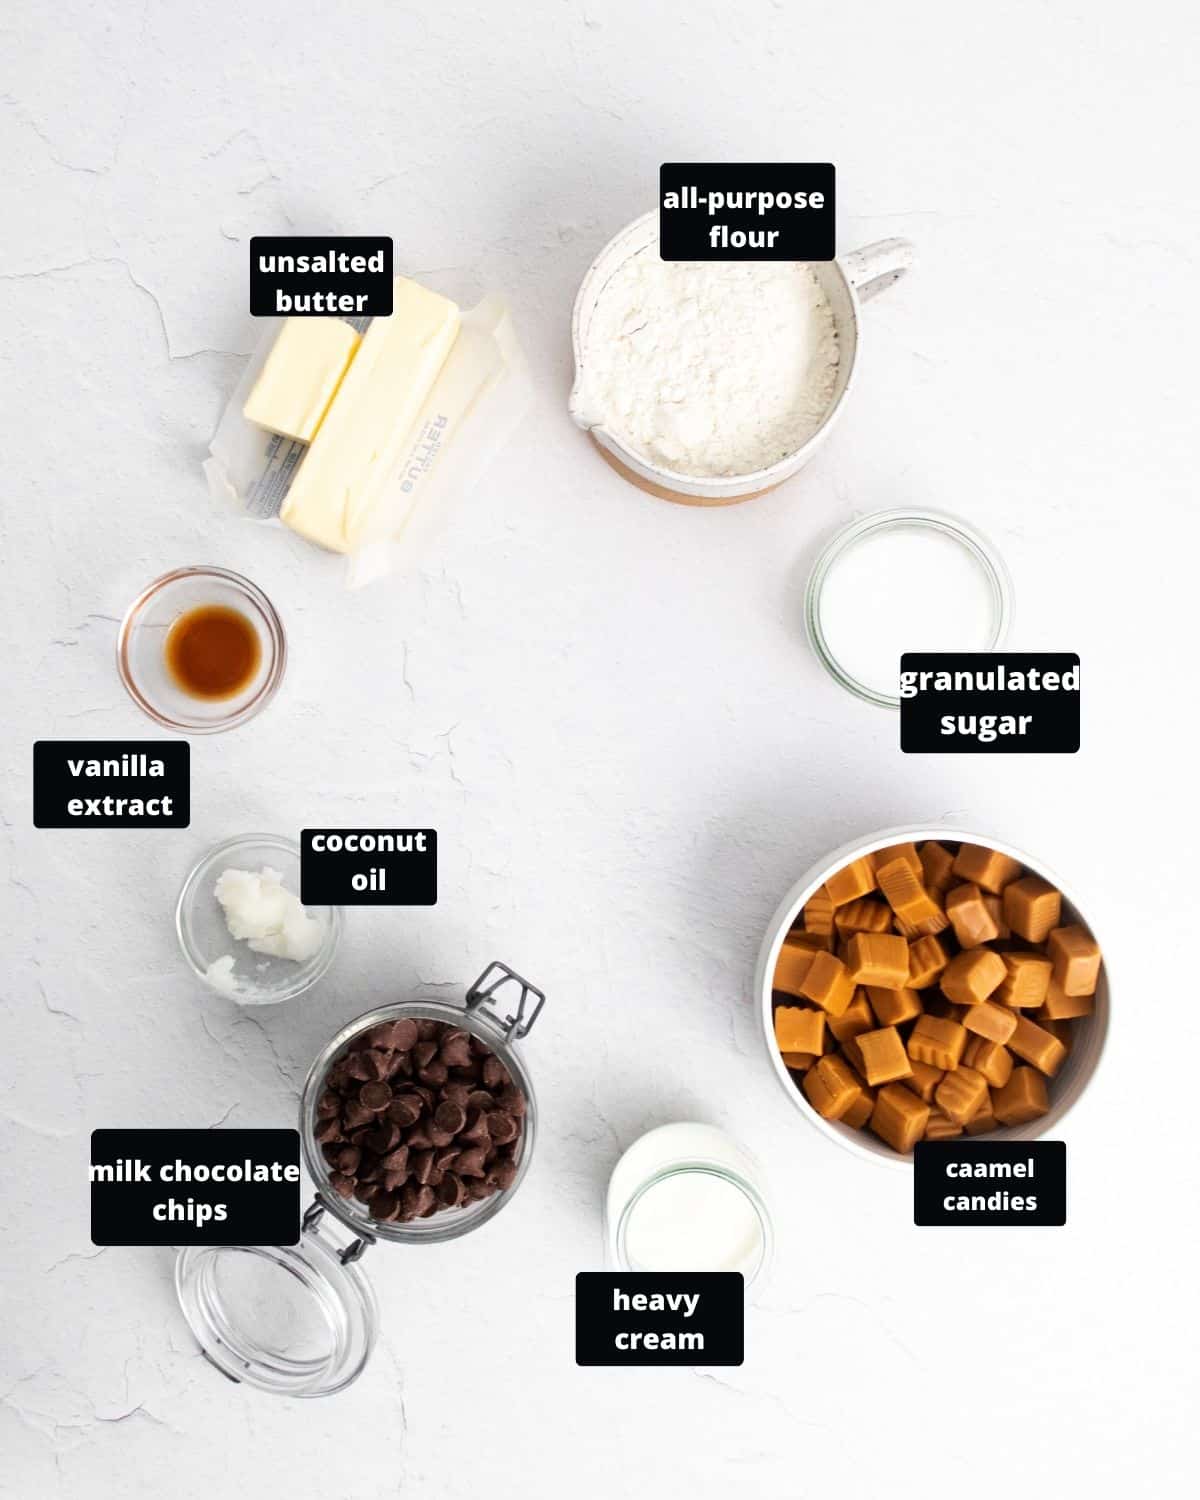 Ingredients to make Twix bars on a white table.